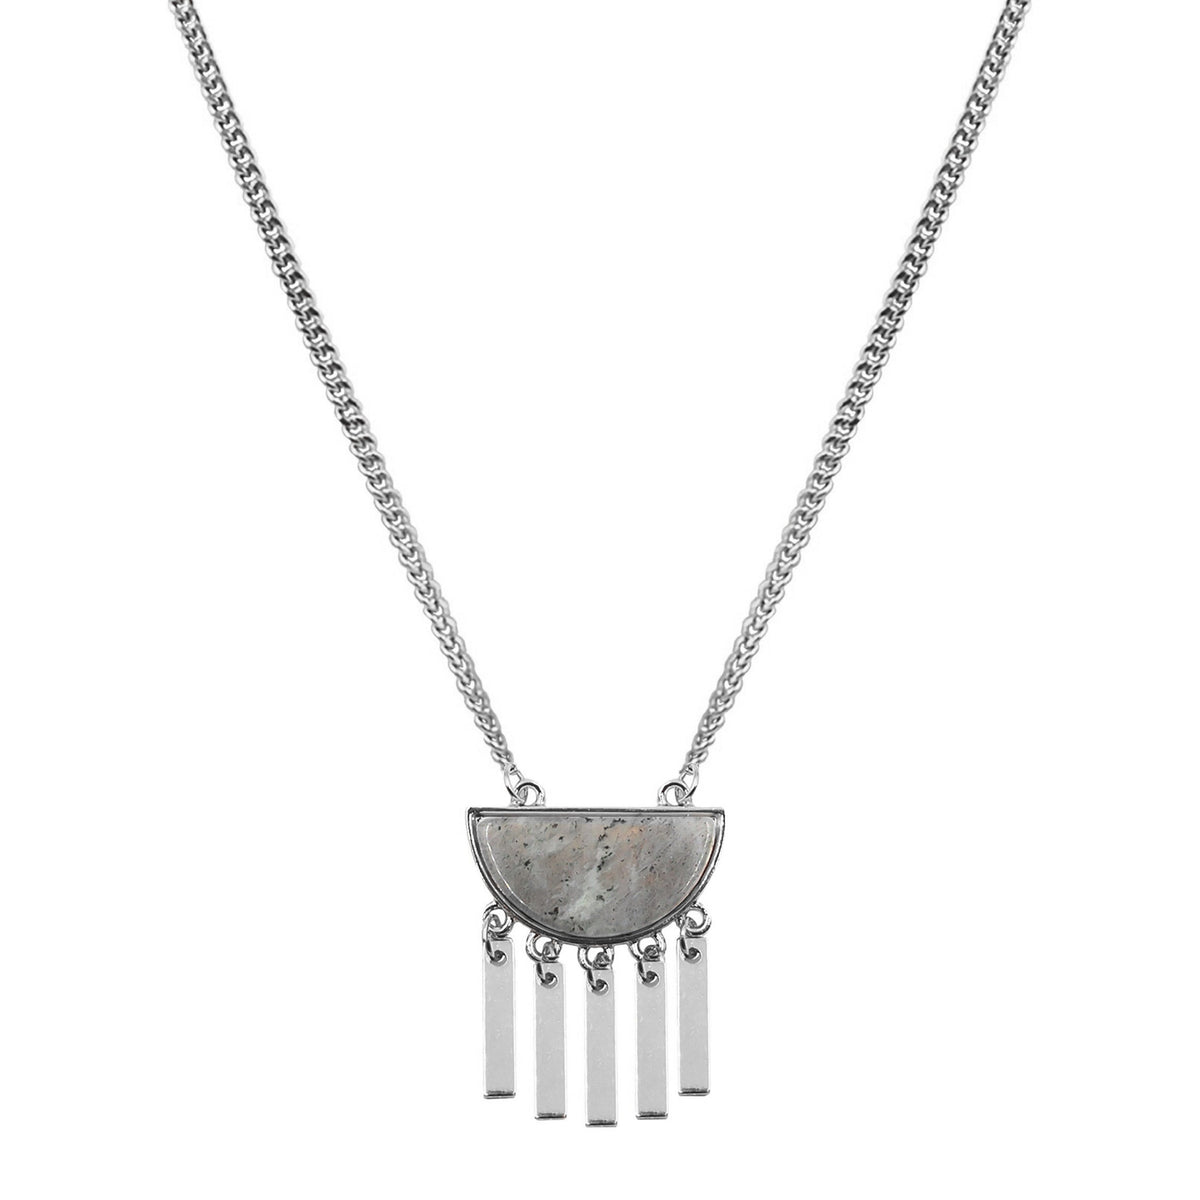 Bianca Collection - Silver Haze Necklace fine designer jewelry for men and women